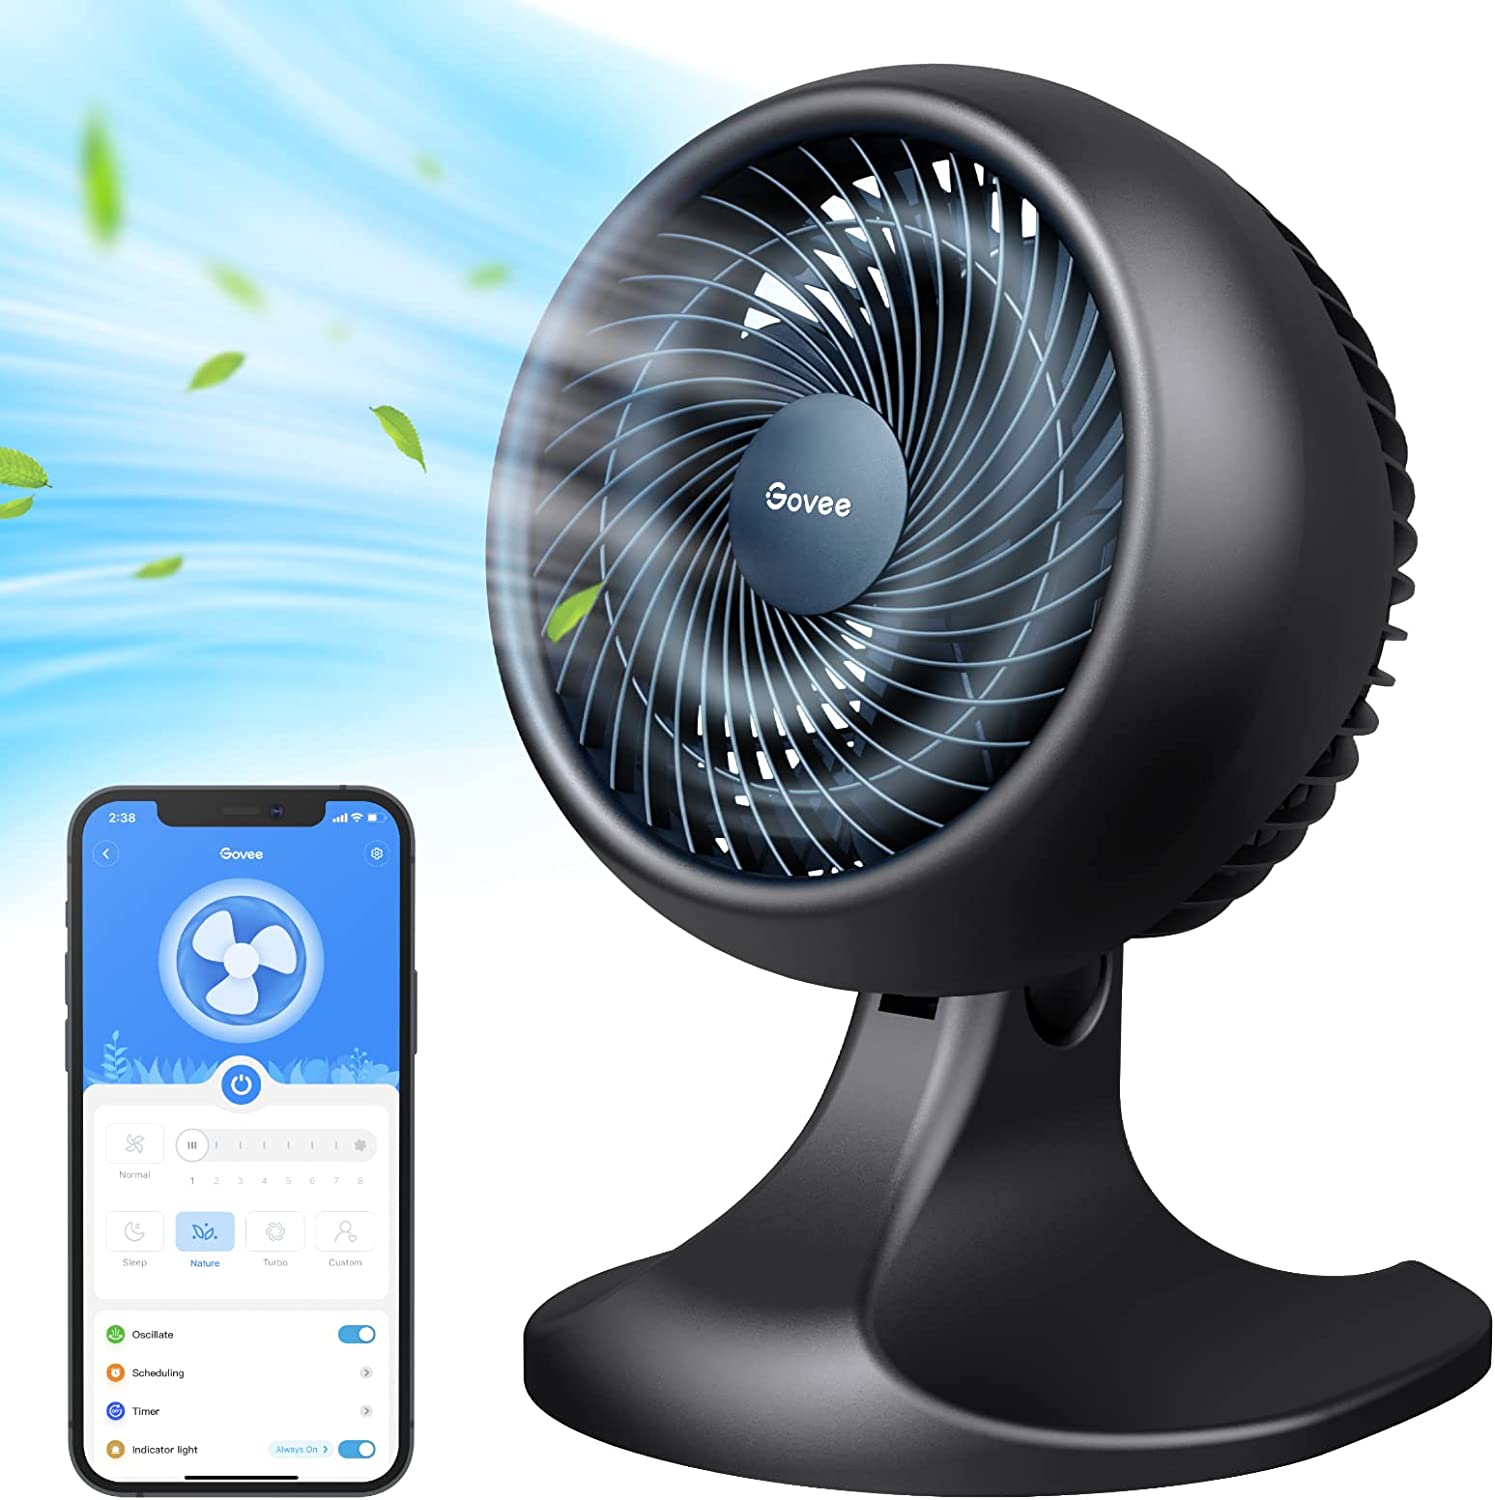 Govee Air Circulator Oscillation Fan, 9 Small Desk Fan for Bedroom with WiFi Alexa Control, 8 Speed Settings, 24H Timer, Auto Mode, Smart Quiet